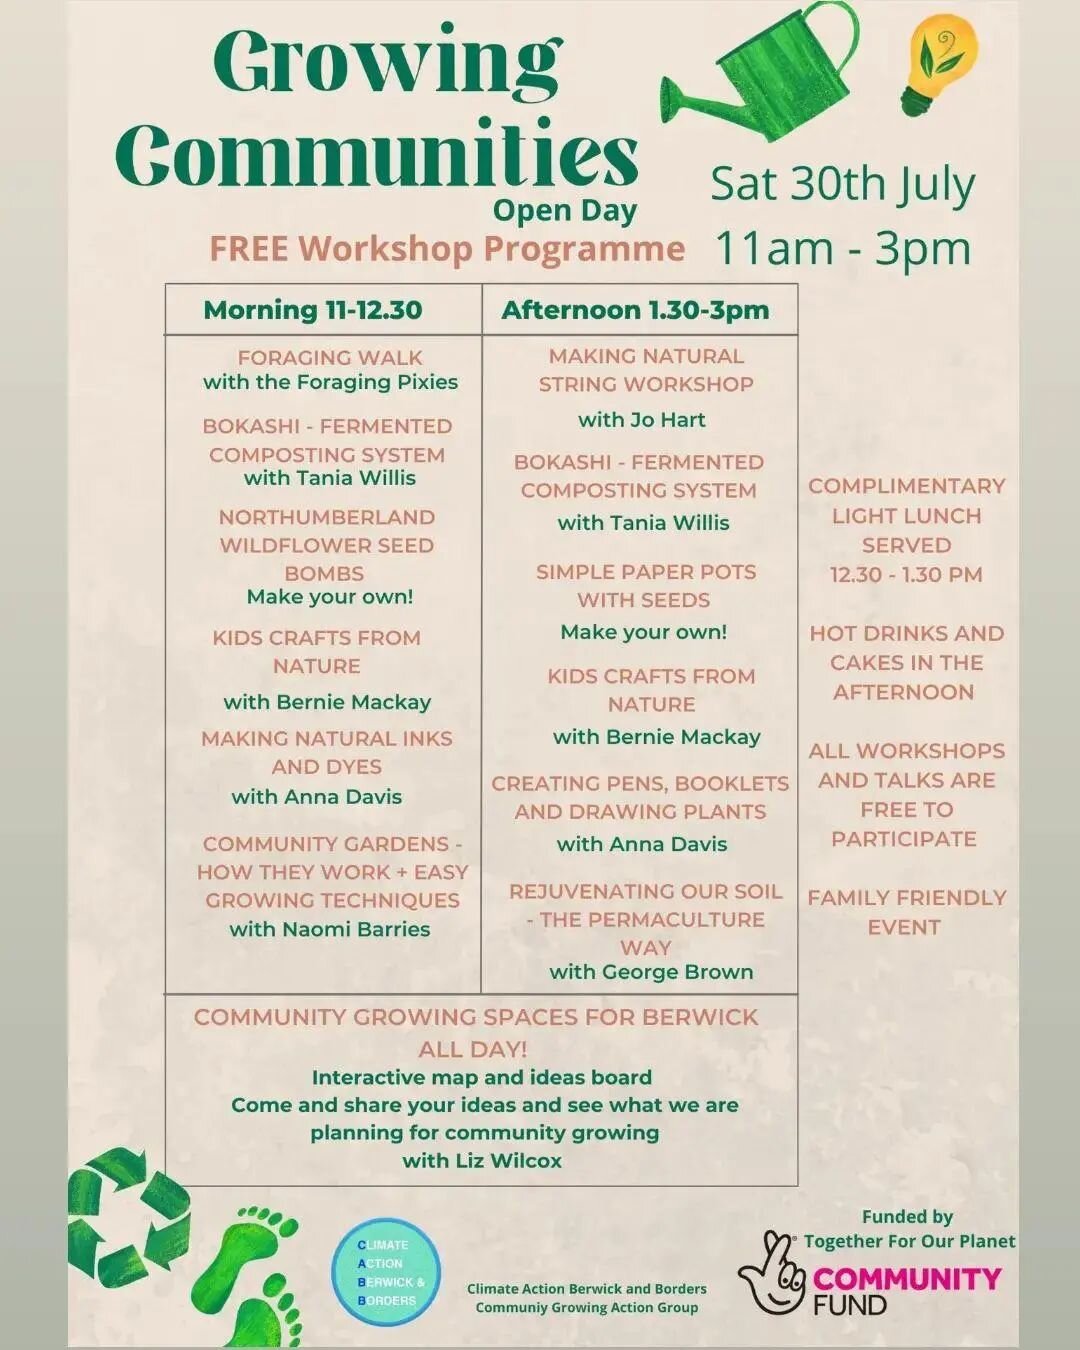 Here's our FREE Workshop Programme for the Open Day, Saturday 30th July 11am - 3pm

Talks, workshops, interactive displays around the theme of Community Growing

ALL completely free, and lunch and refreshments included for all participants

We hope t